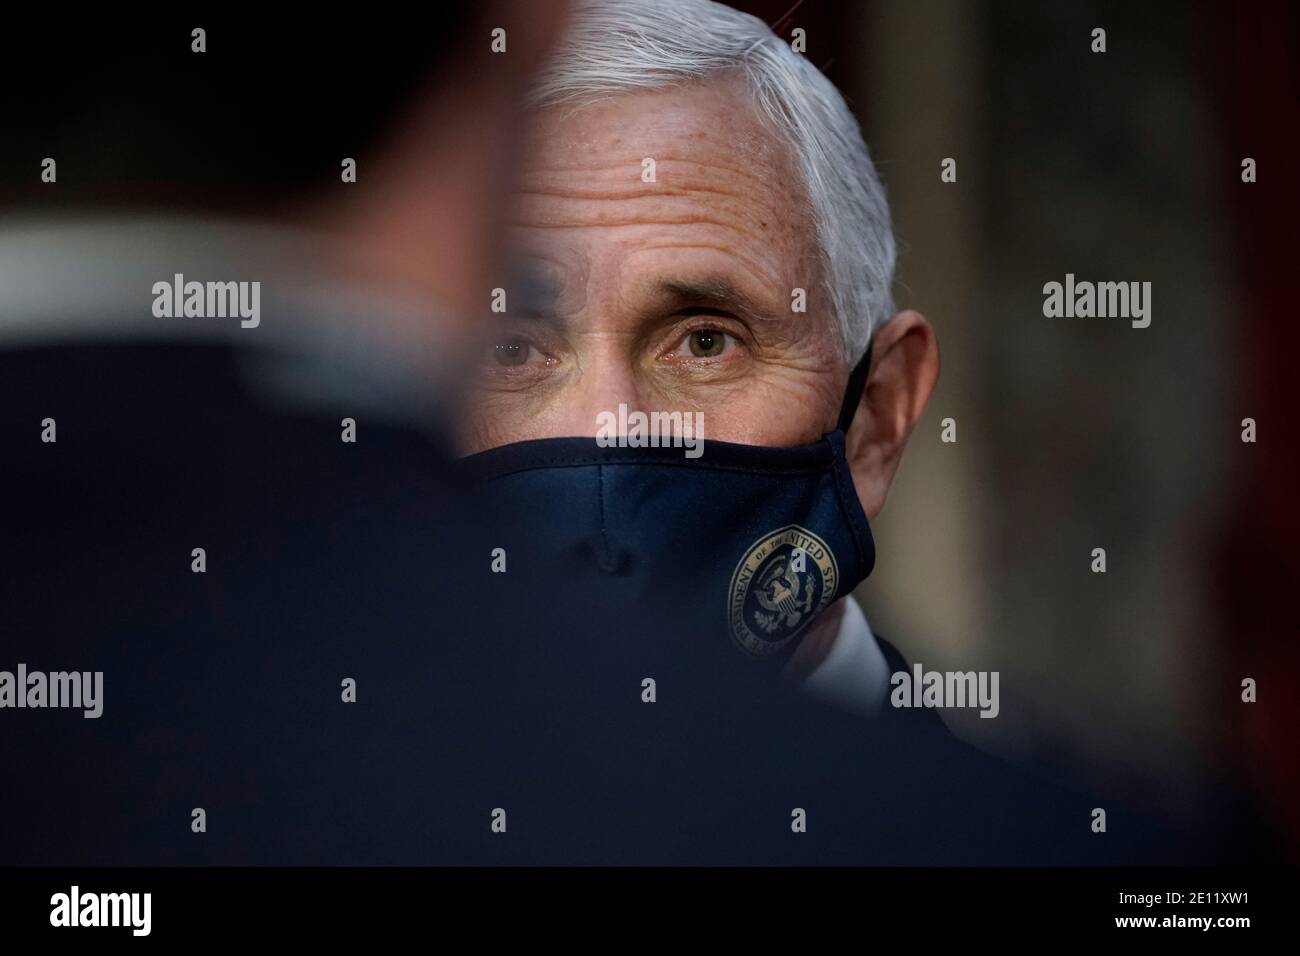 Washington, USA. 03rd Jan, 2021. Vice President Mike Pence finishes a swearing-in ceremony for senators in the Old Senate Chamber at the Capitol in Washington, Sunday, Jan. 3, 2021. (Photo by J. Scott Applewhite/Pool/Sipa USA) Credit: Sipa USA/Alamy Live News Stock Photo